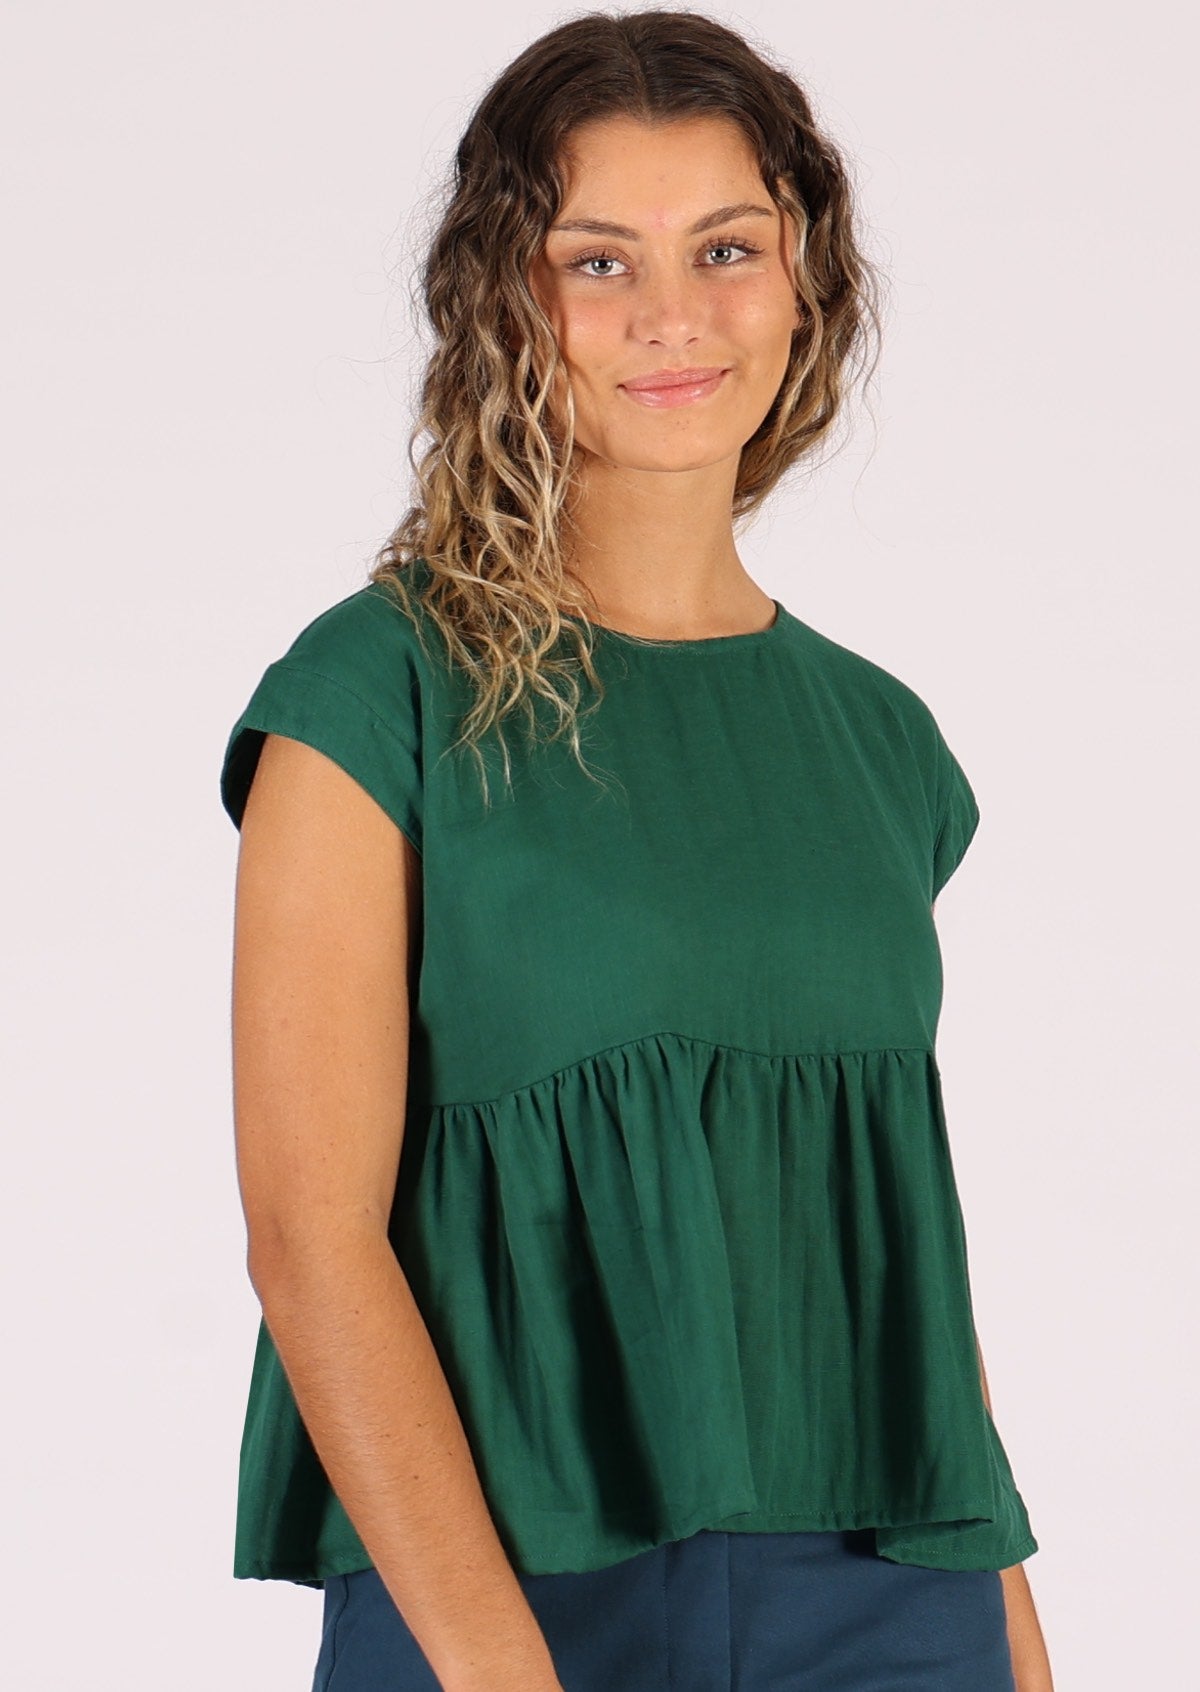 Cotton gauze top in deep green with cap sleeves